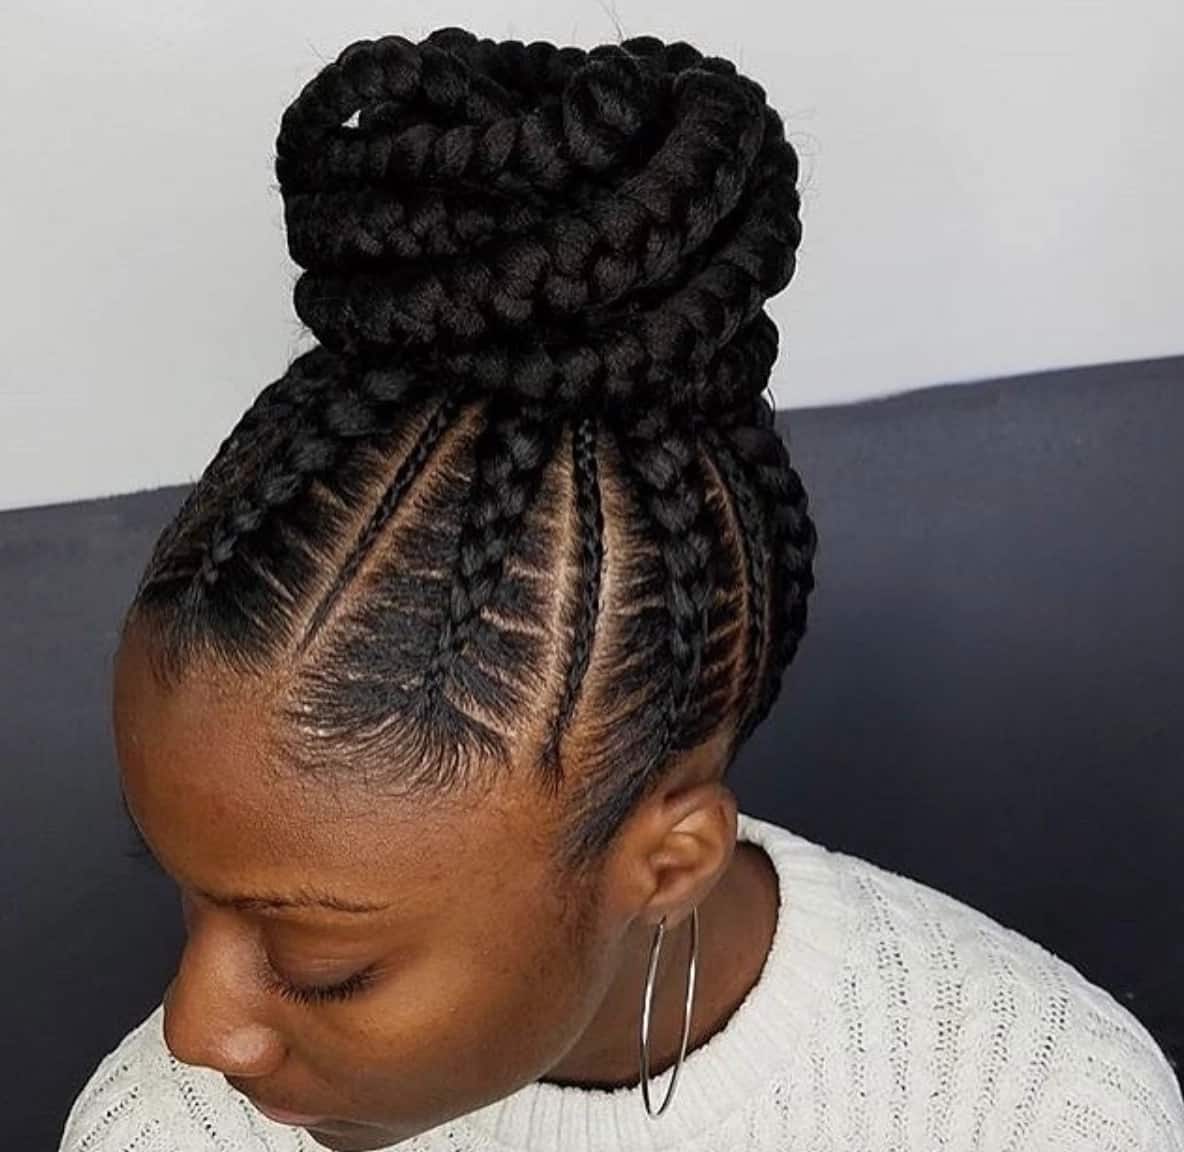 Wondering which ghanian lines style to put next? Try one of the styles... |  TikTok